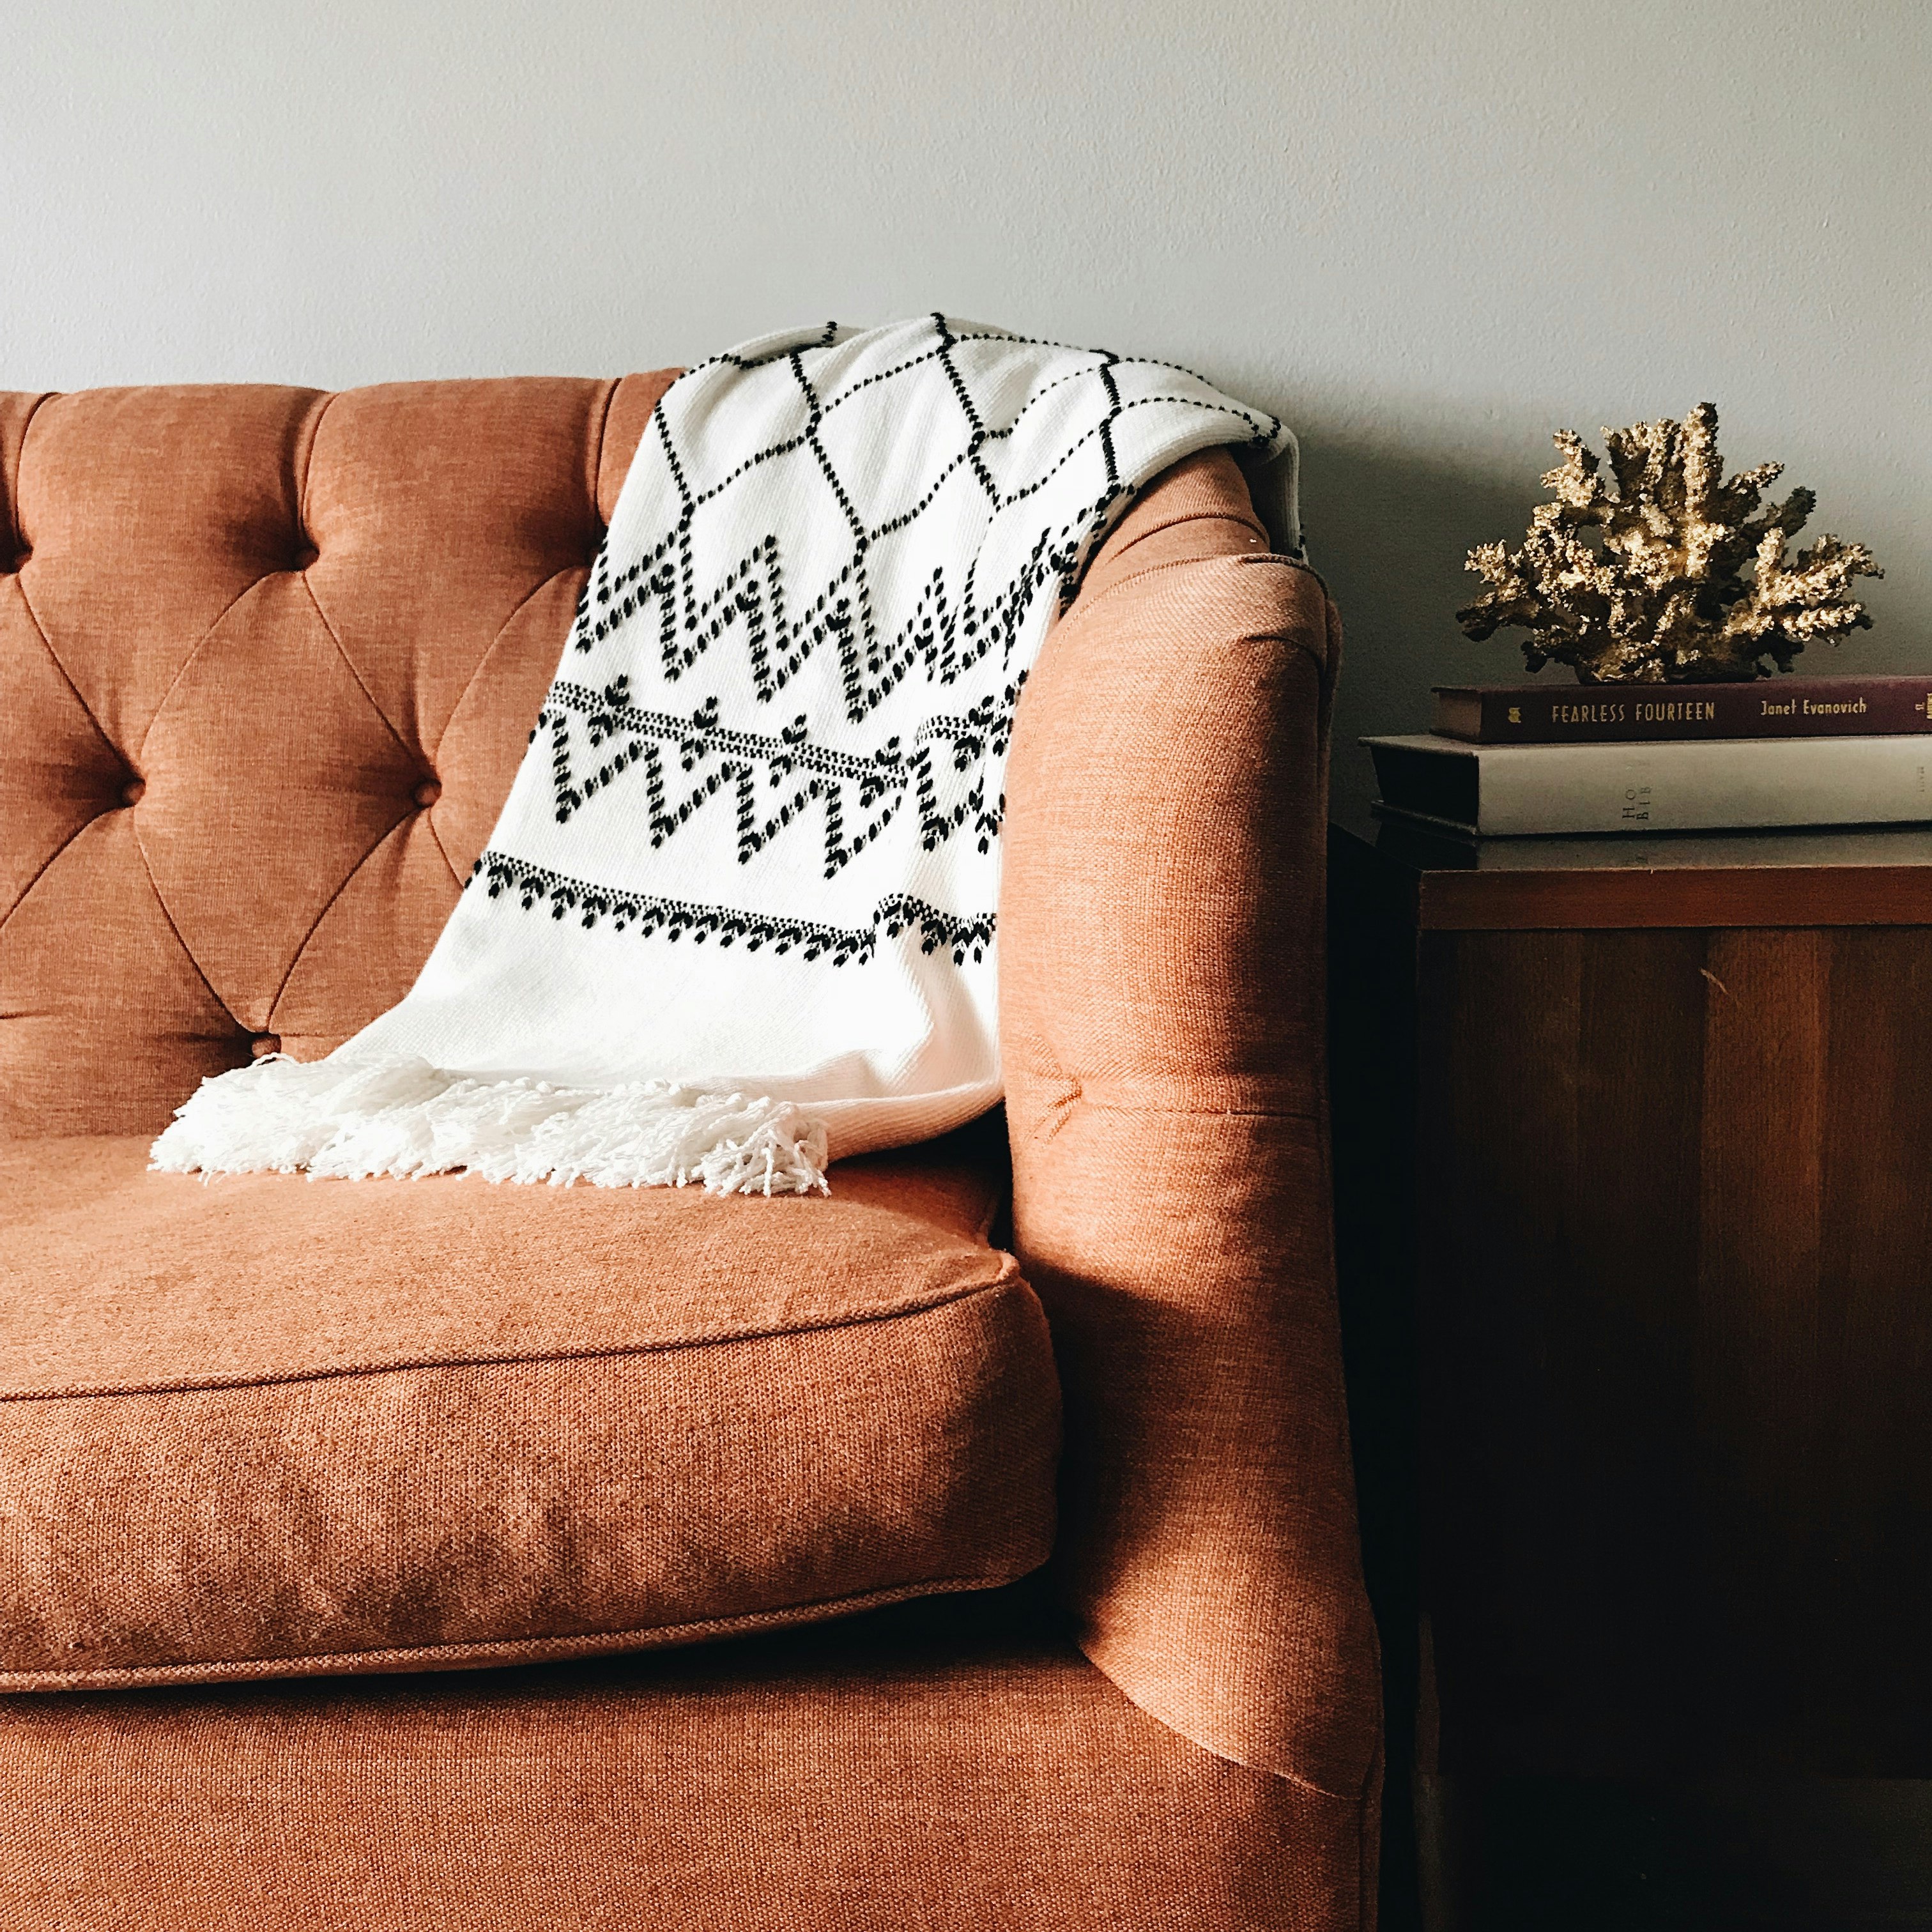 white and black textile on brown couch